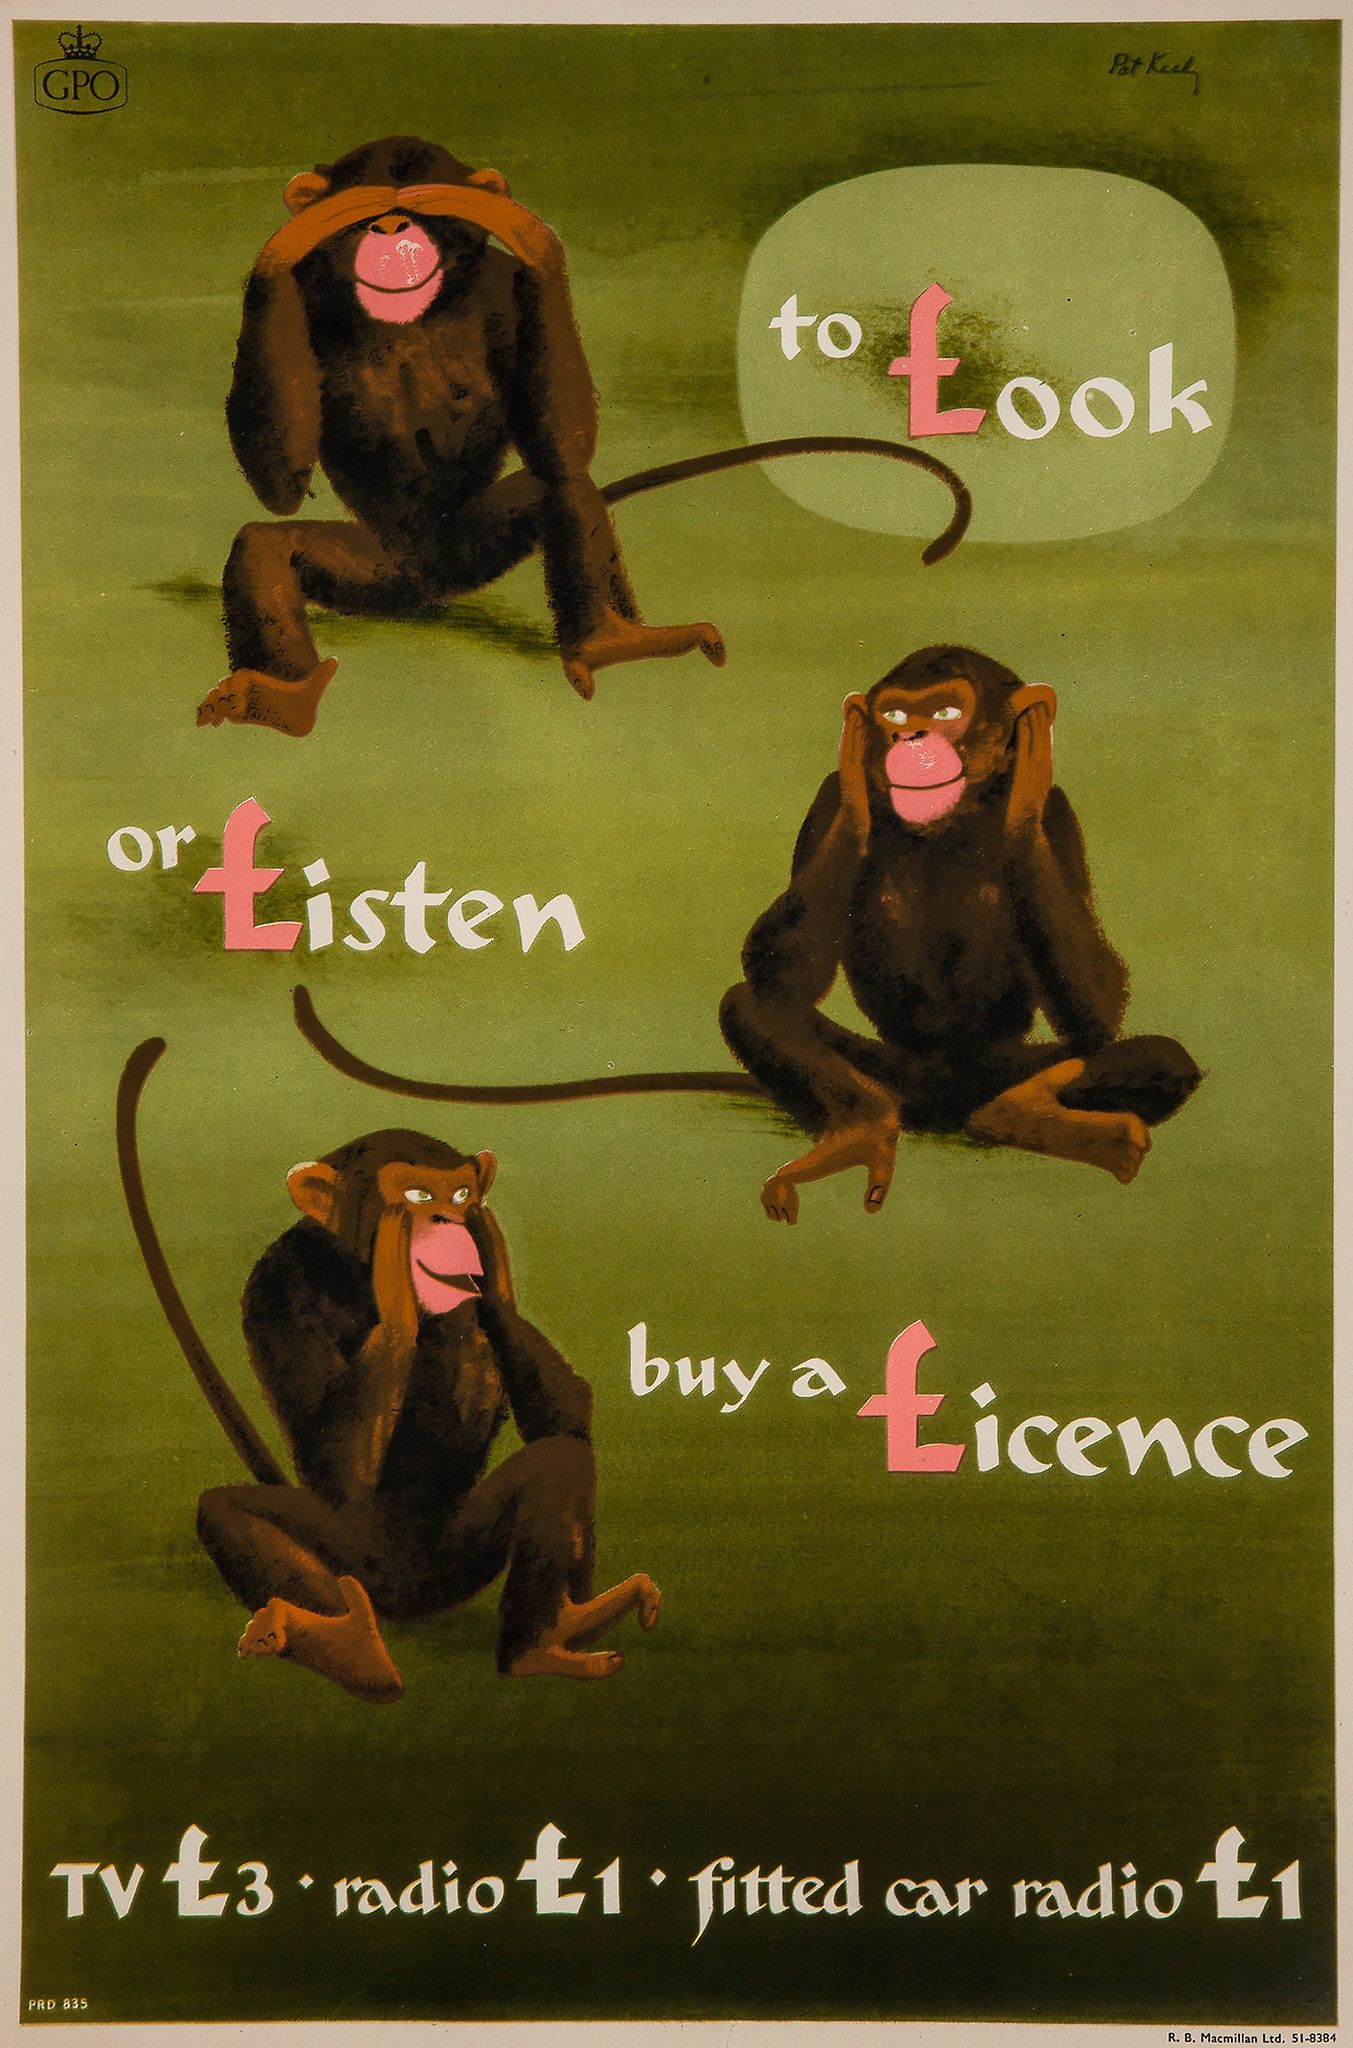 KEELY, Pat - TO LOOK OR LISTEN BUY A LICENCE, GPO lithographic poster in colours, cond. A, not